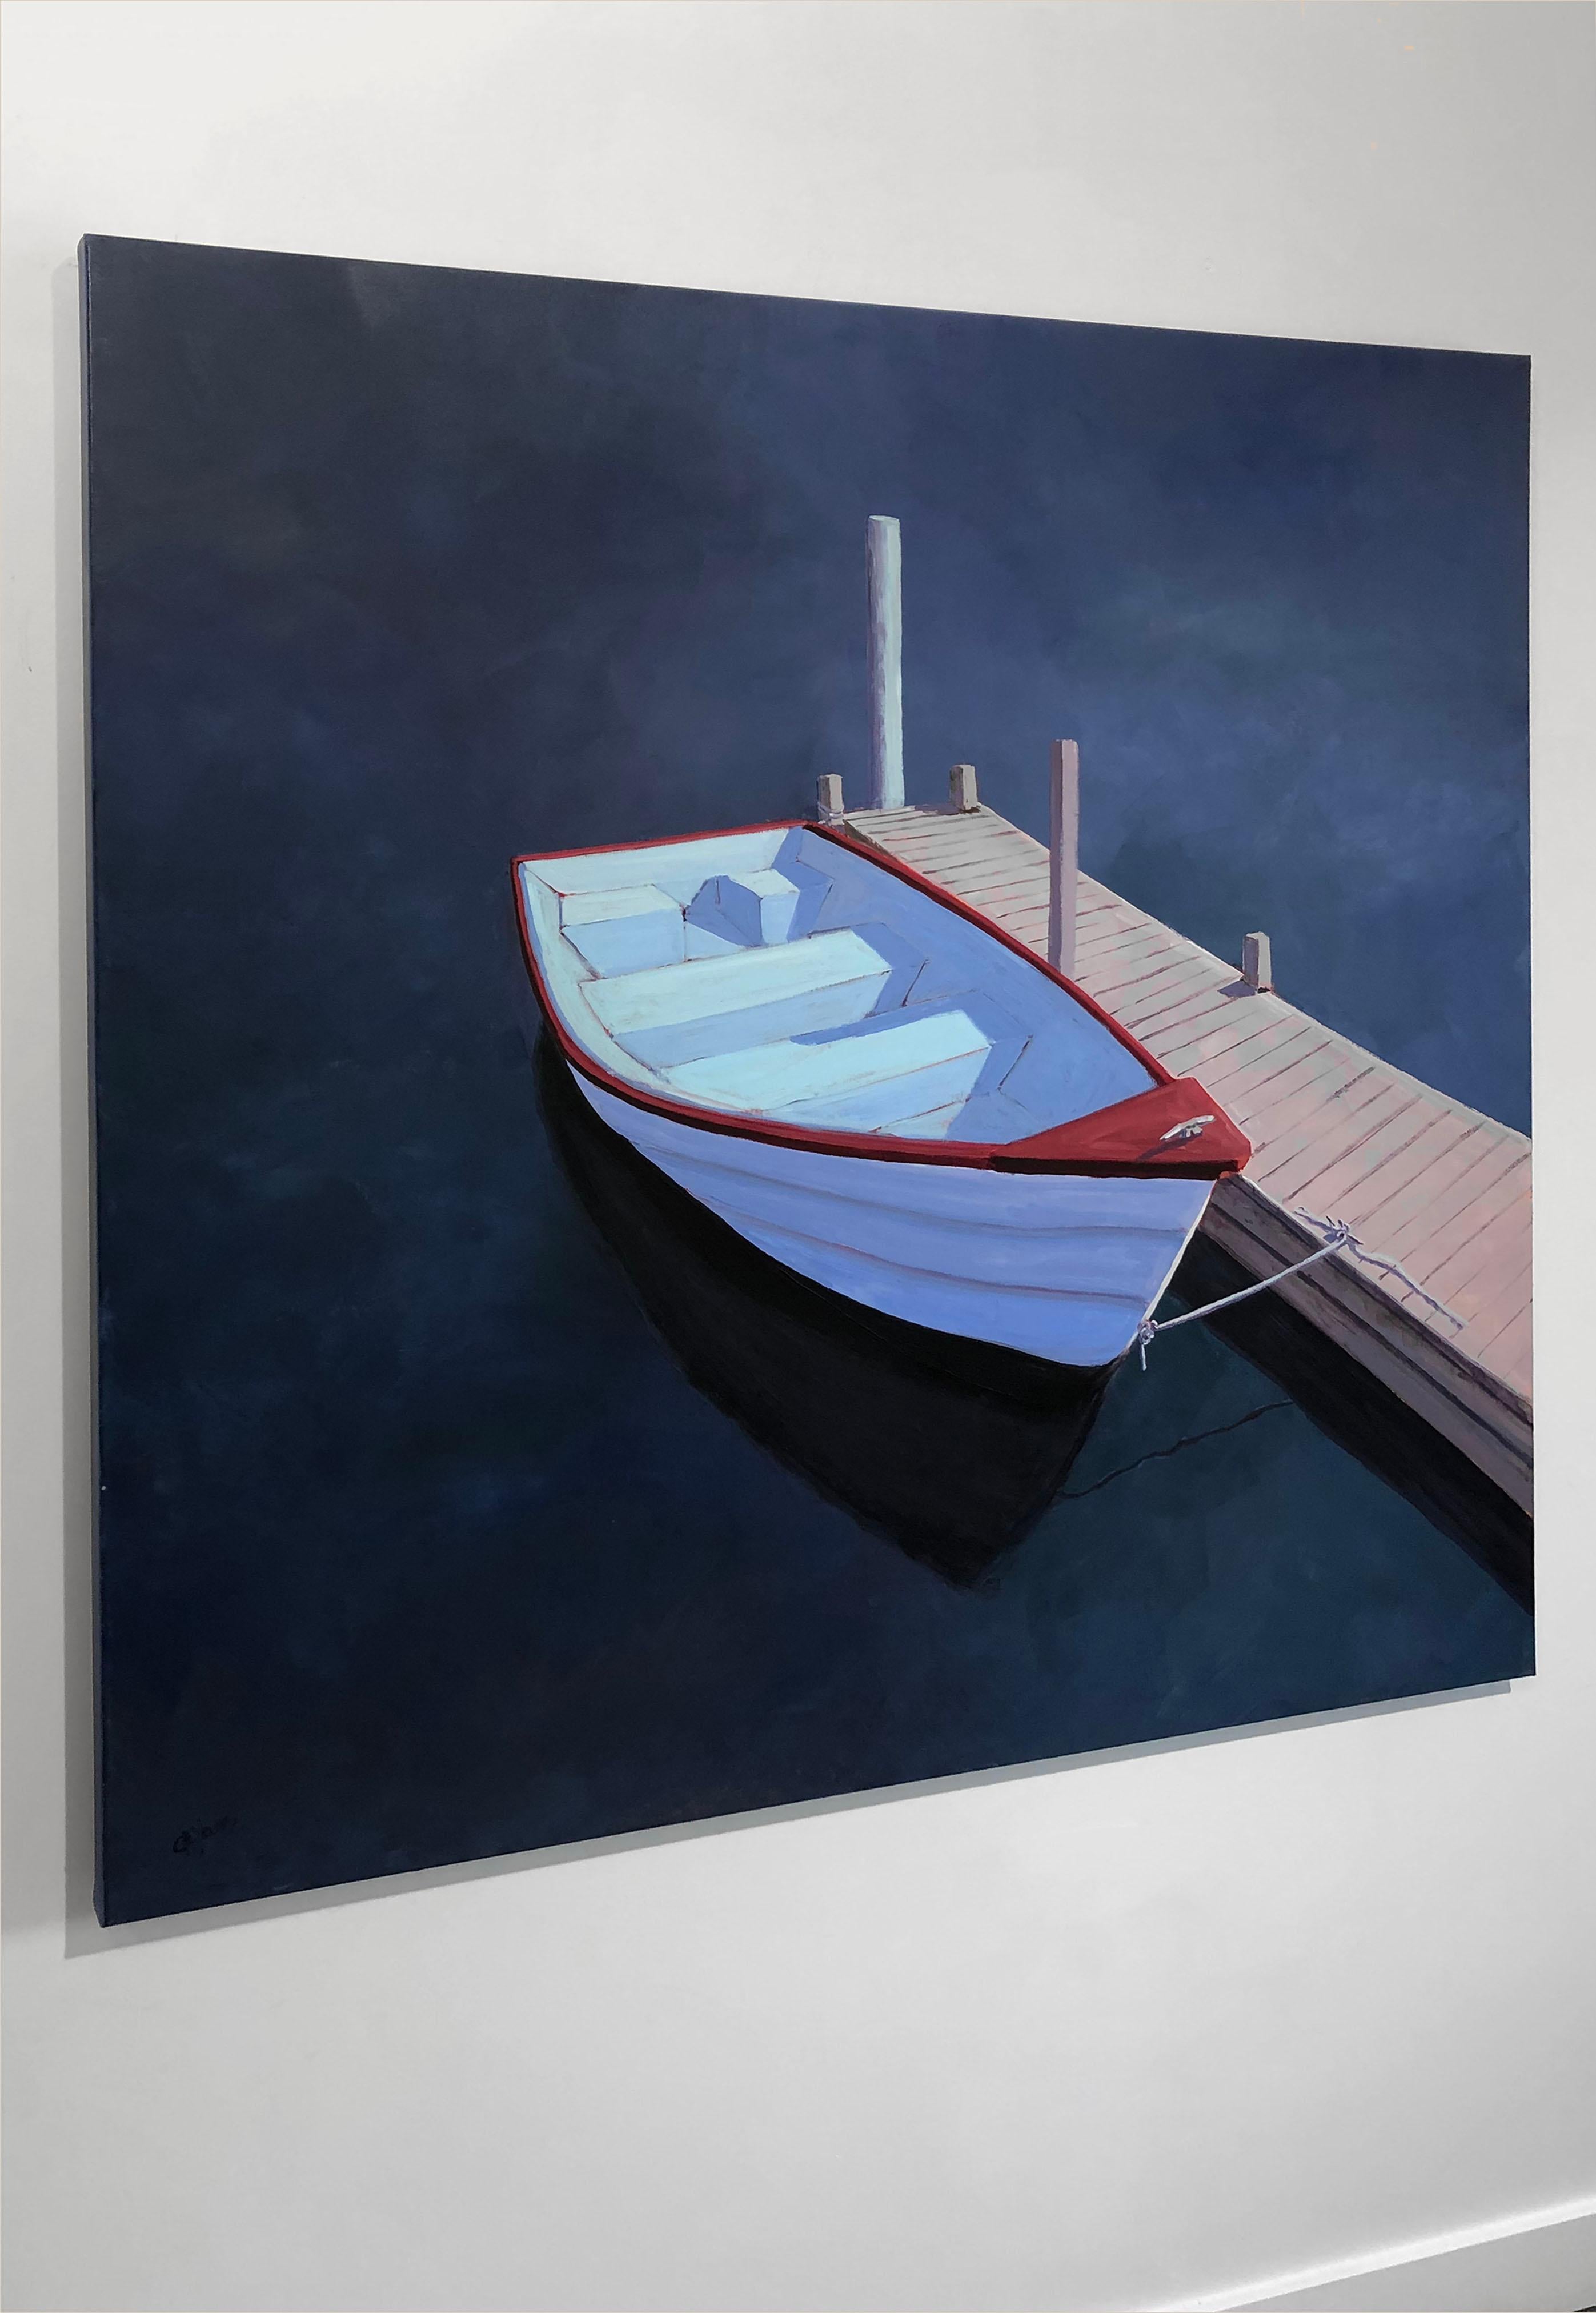 This contemporary coastal painting by Carol Young depicts a light blue rowboat with a painted red rim, tied to a neutral beige dock which extends from the bottom-right edge of the canvas into the center, drawing the eye into the composition. The